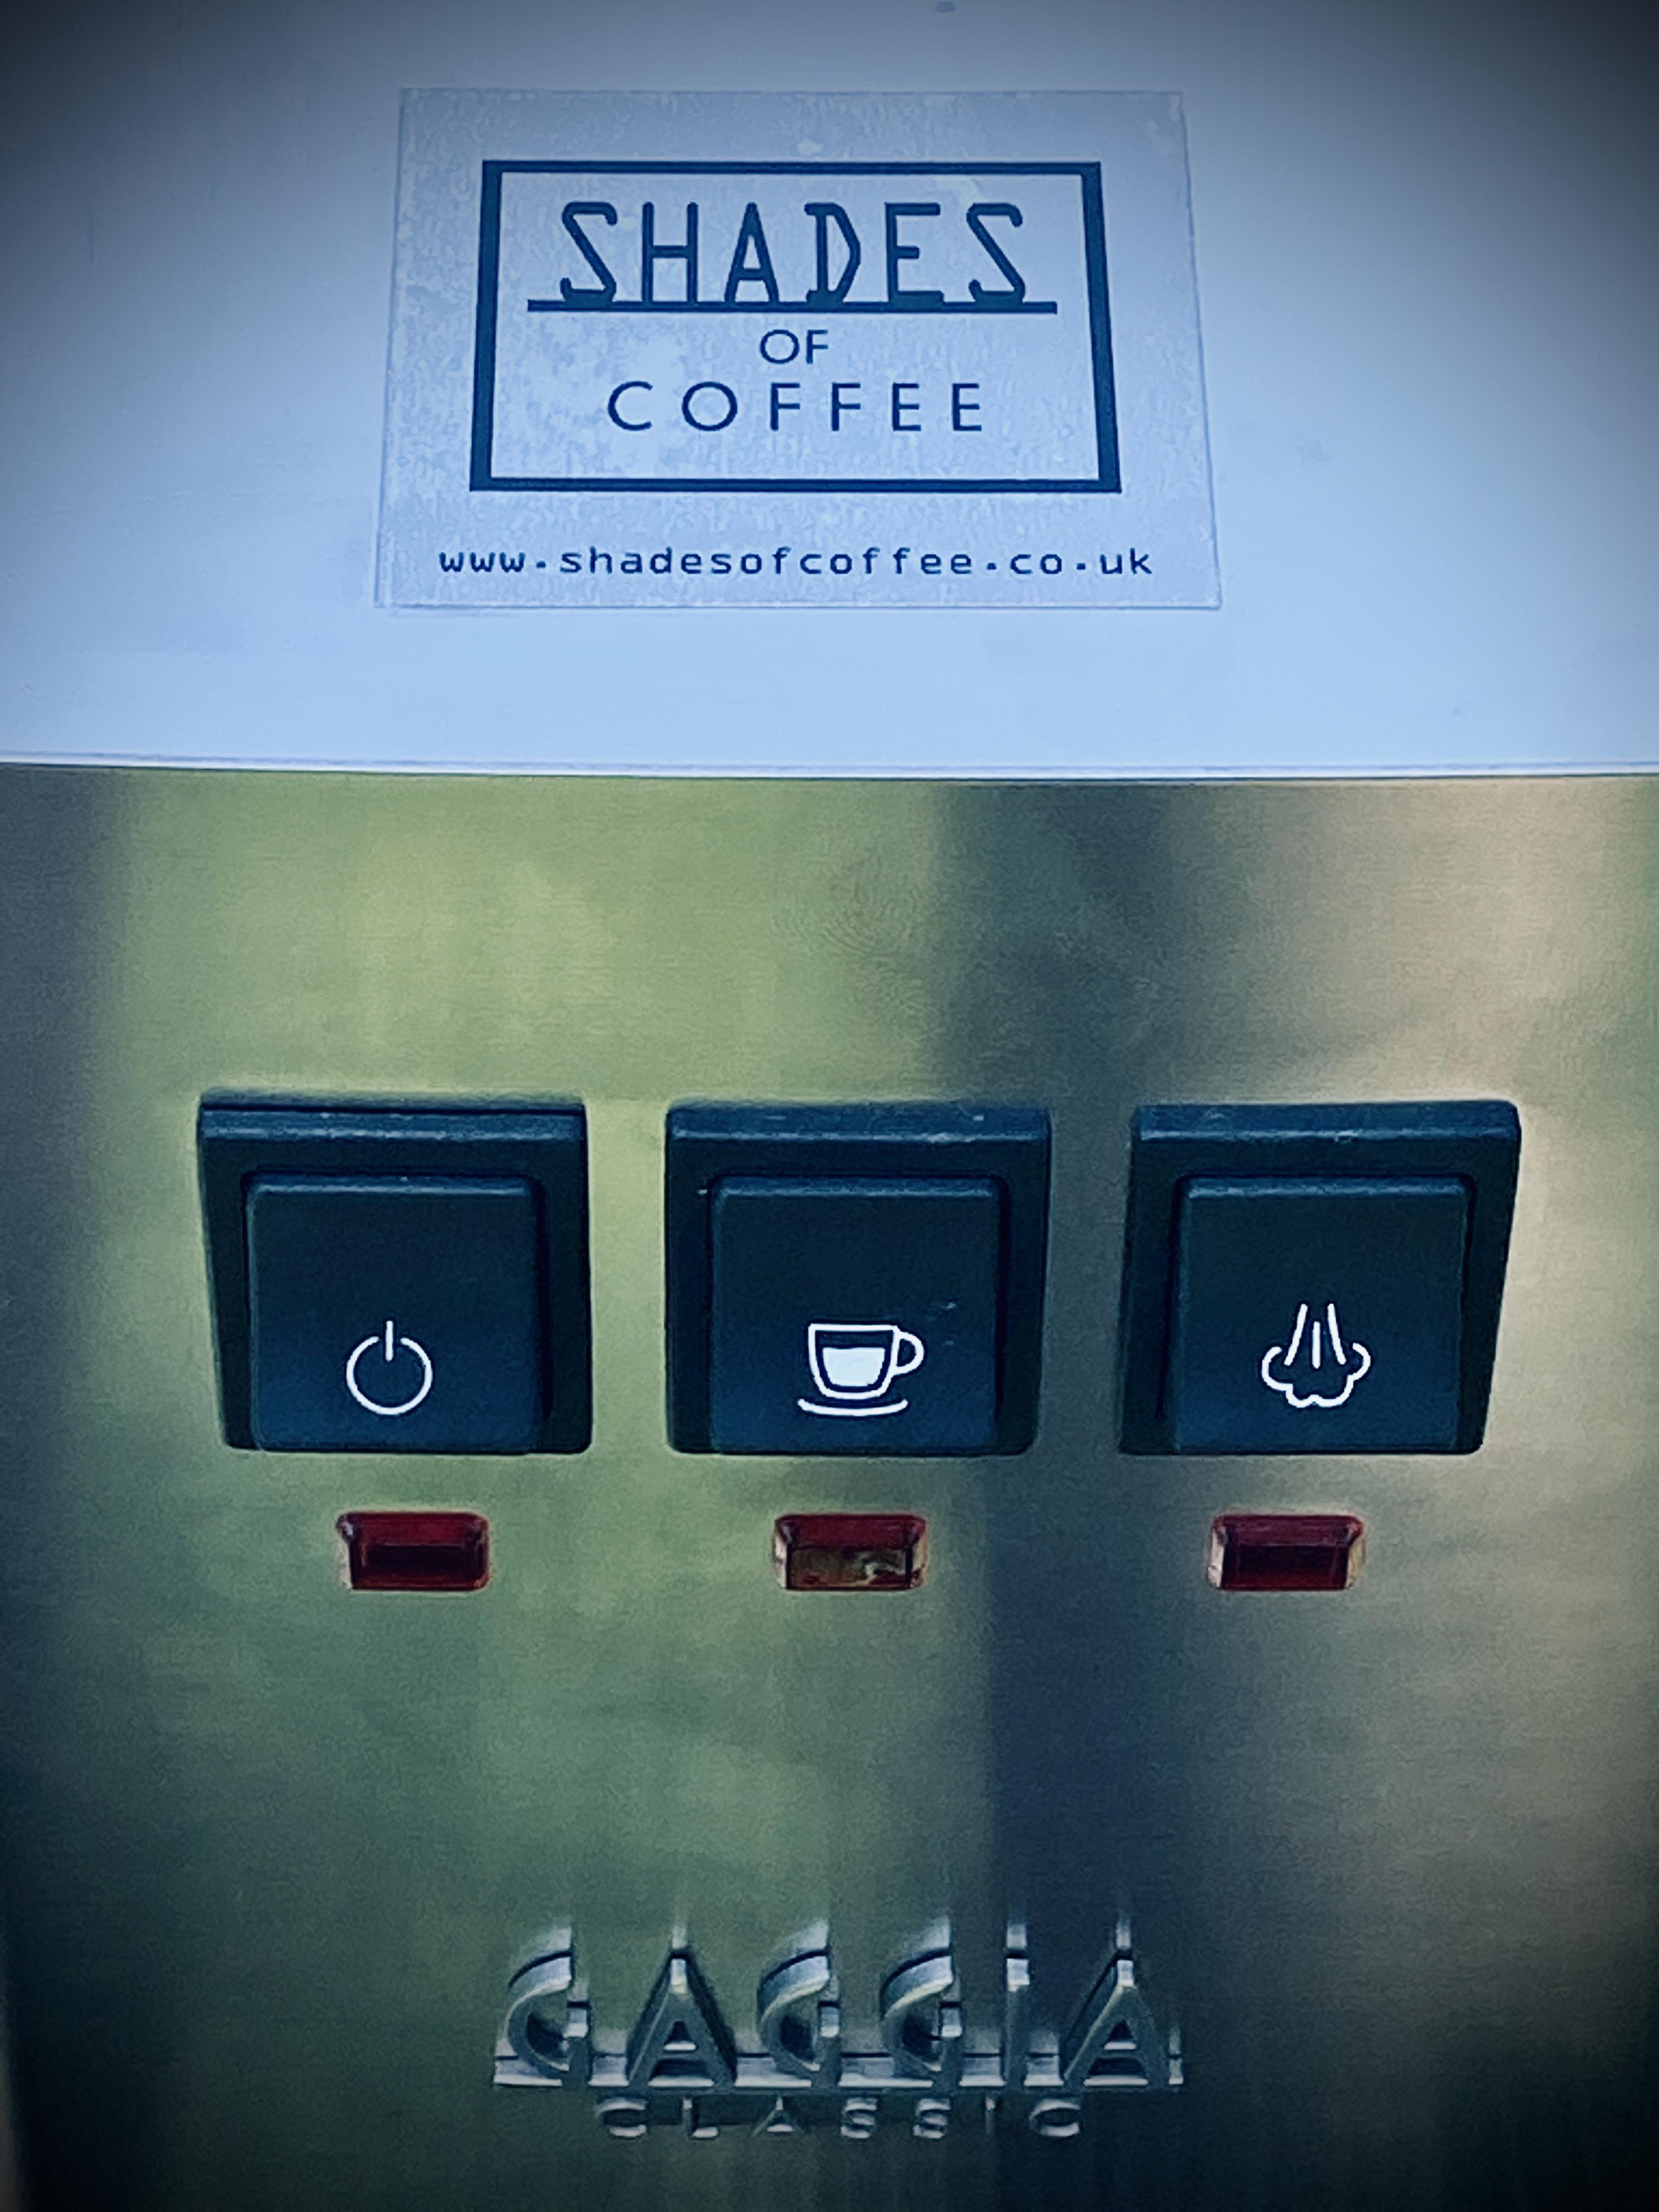 Shades of Coffee logo on Classic